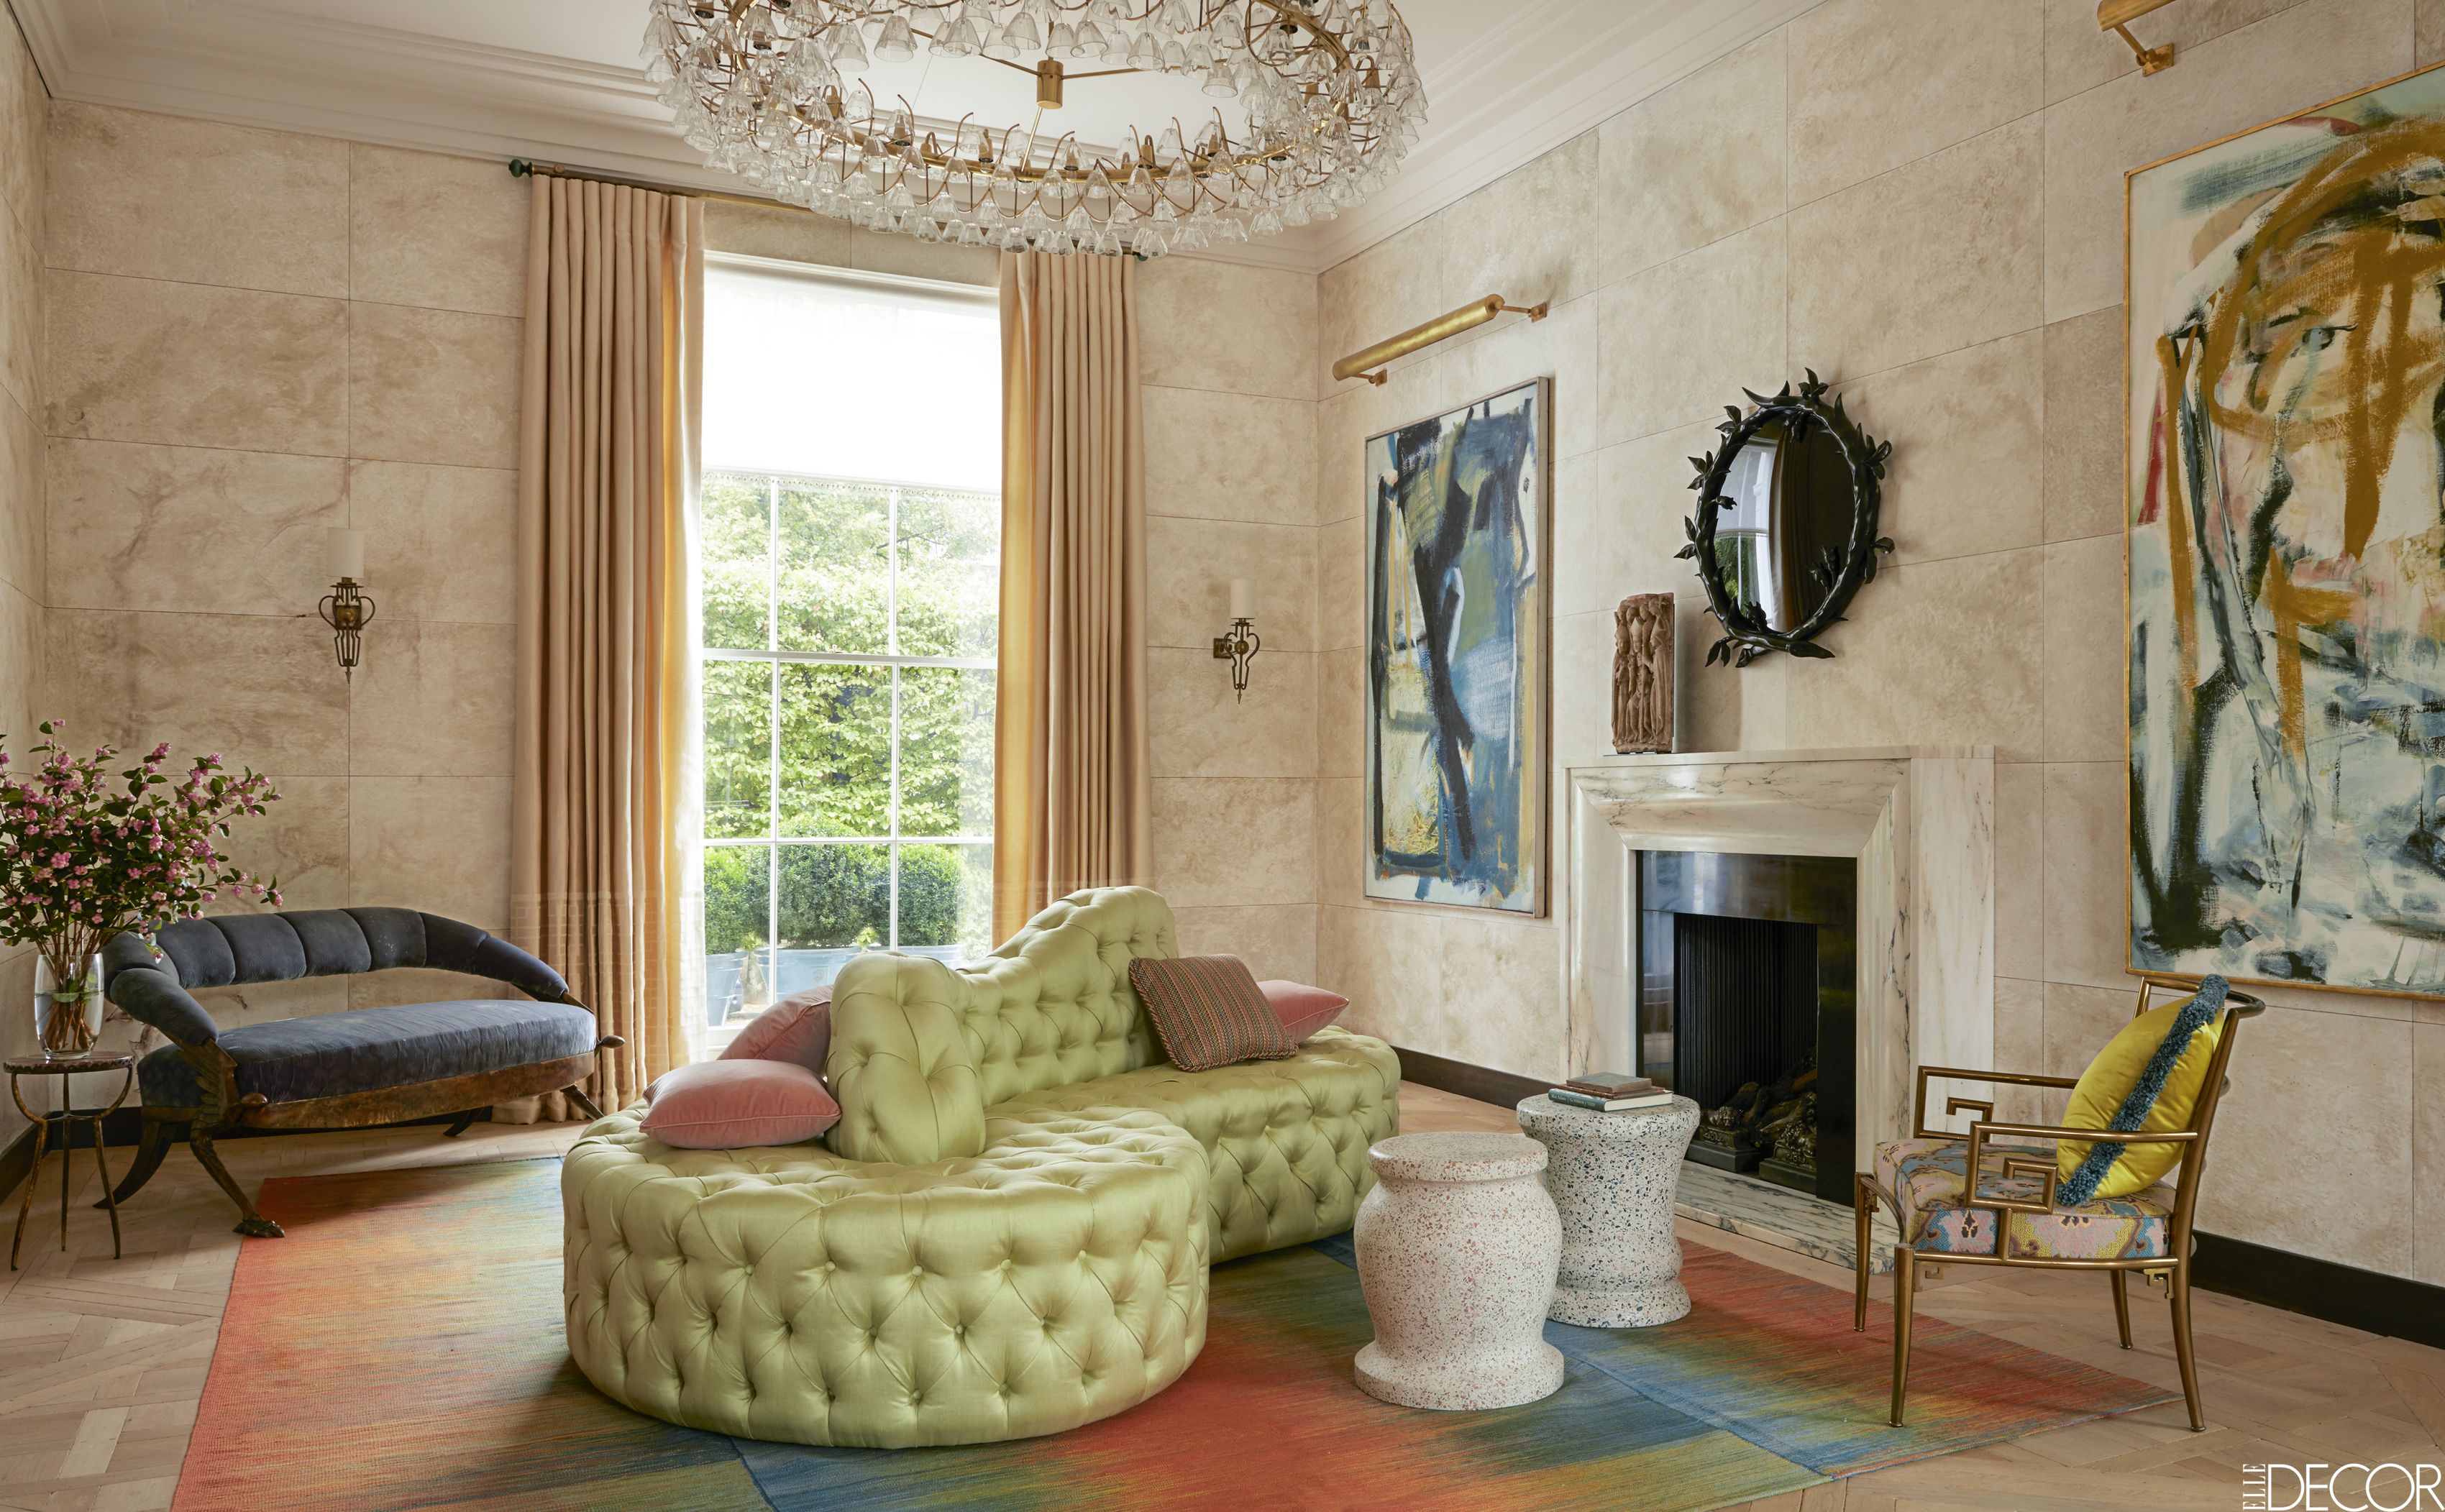 Melissa and Miller Interiors and the Luxurious London House